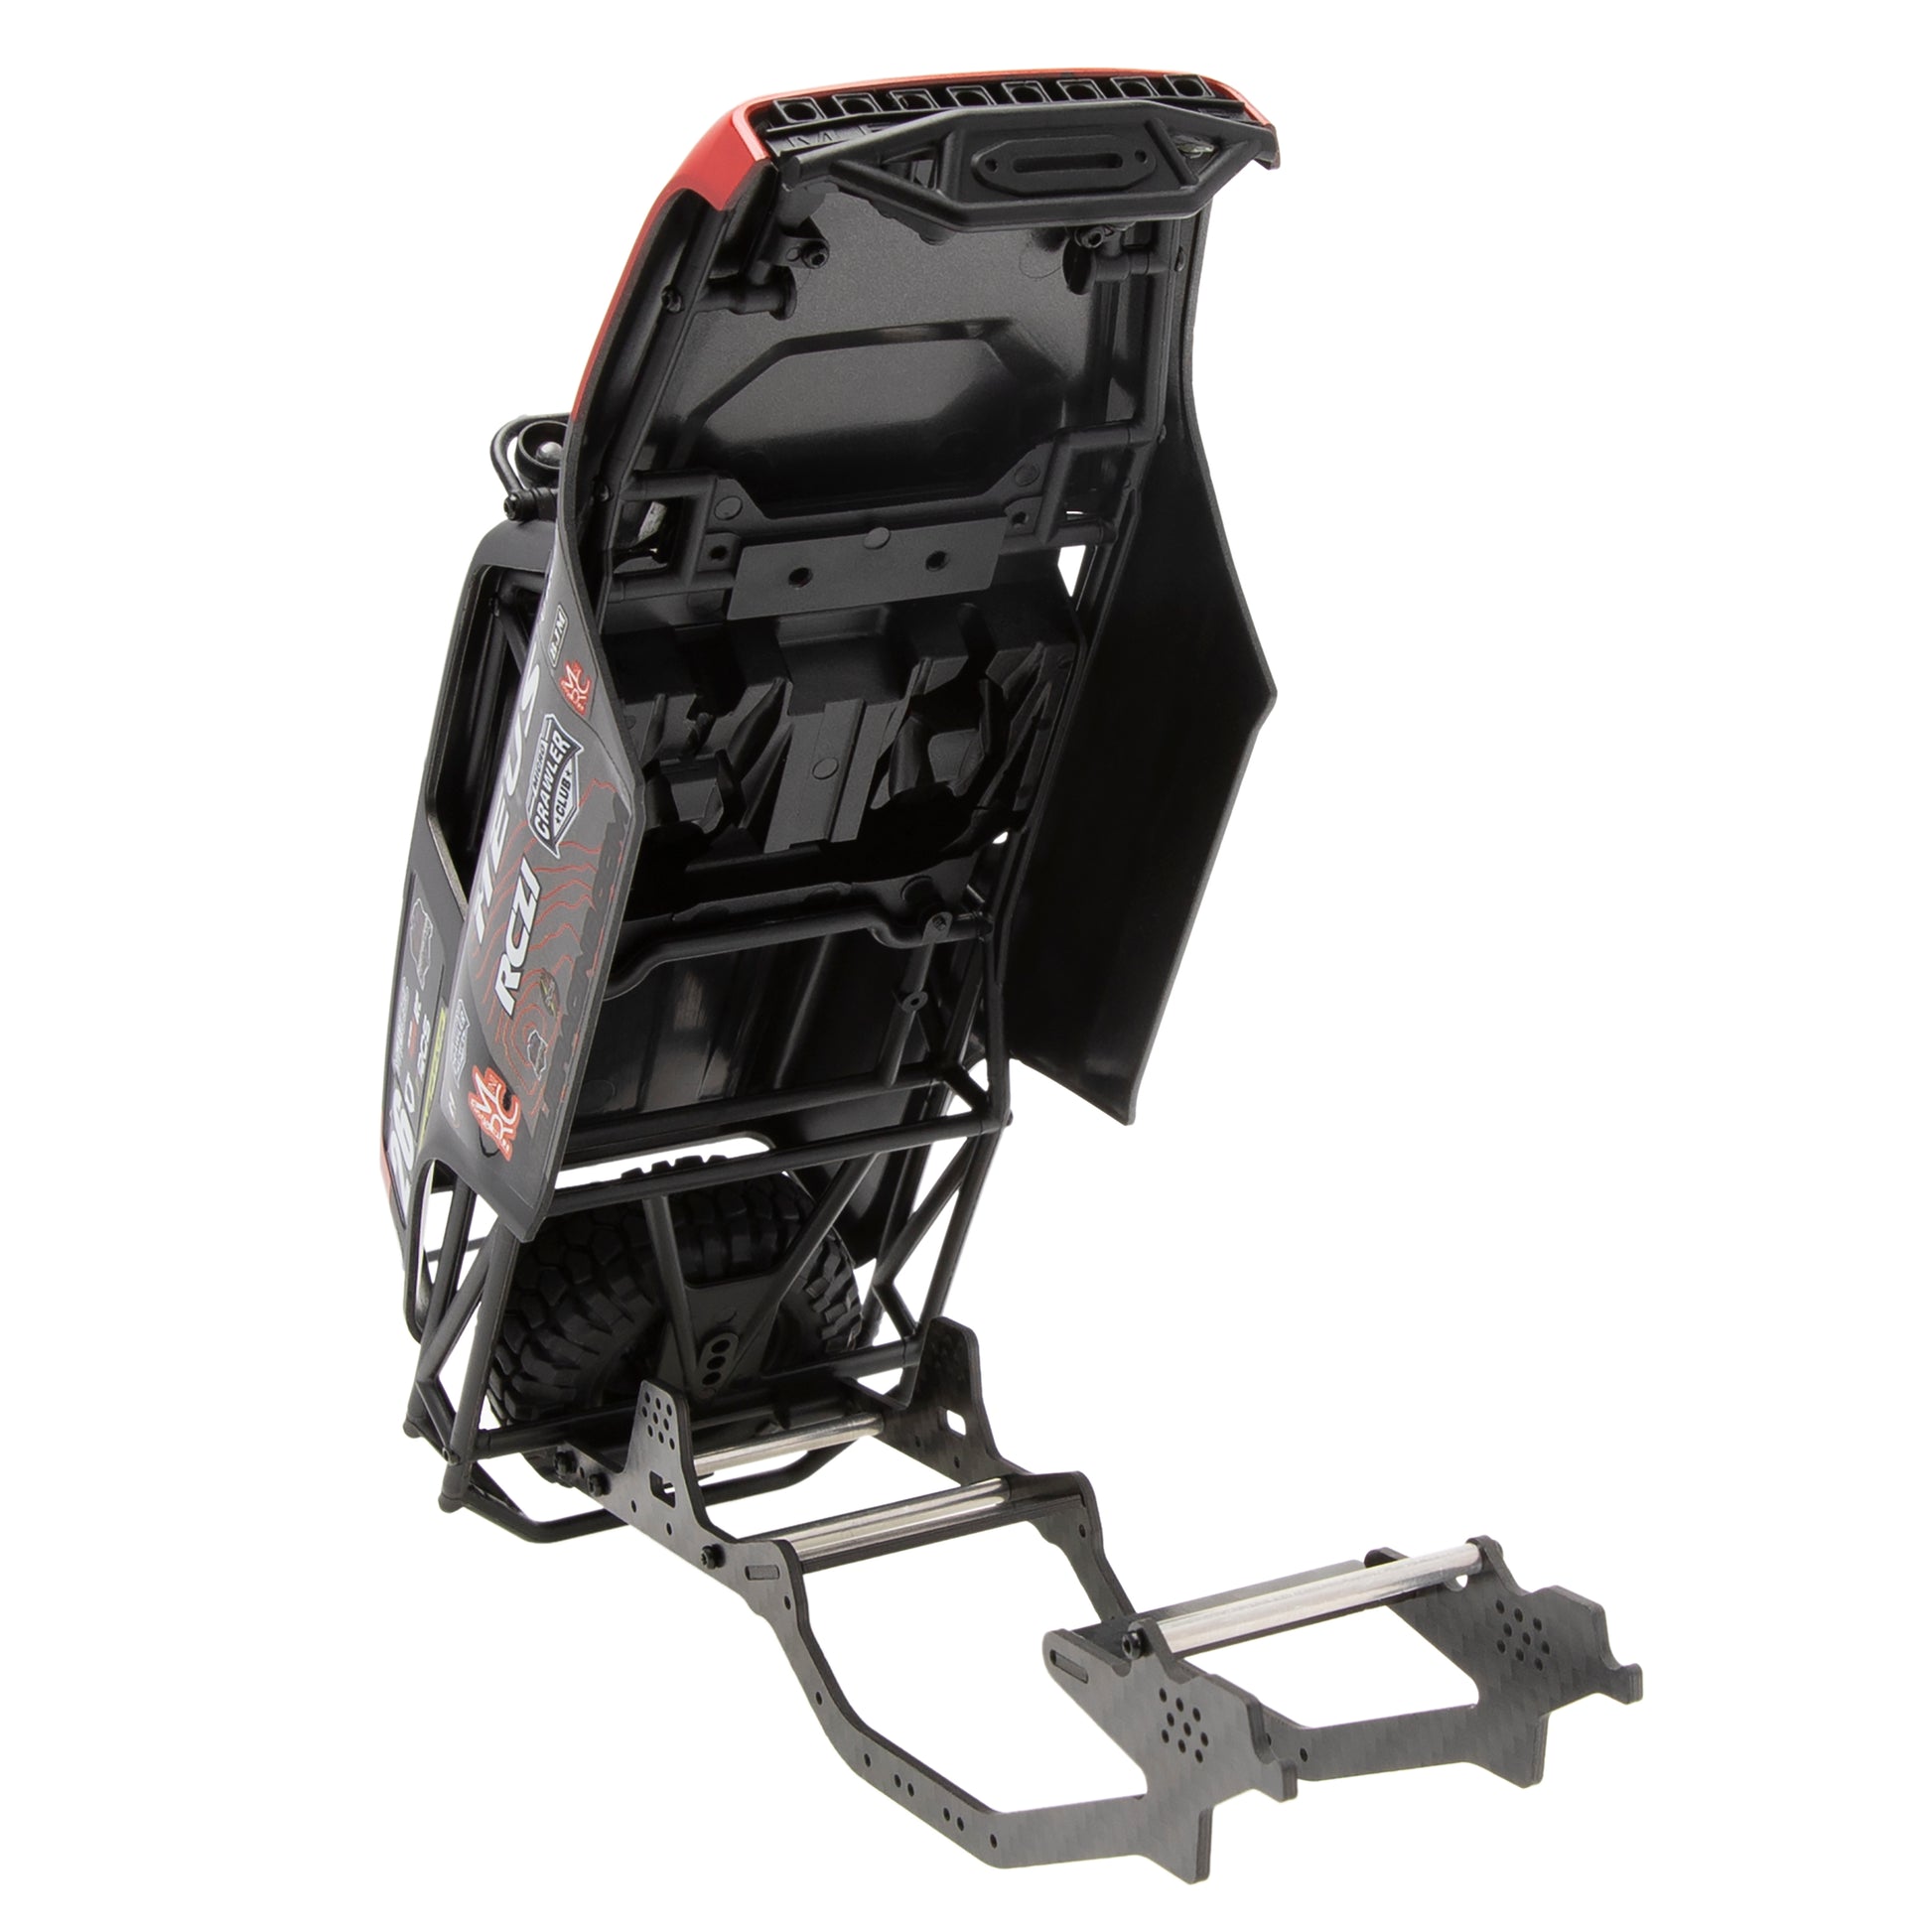 Red MB24 ABS body shell with carbon fiber Frame for SCX24